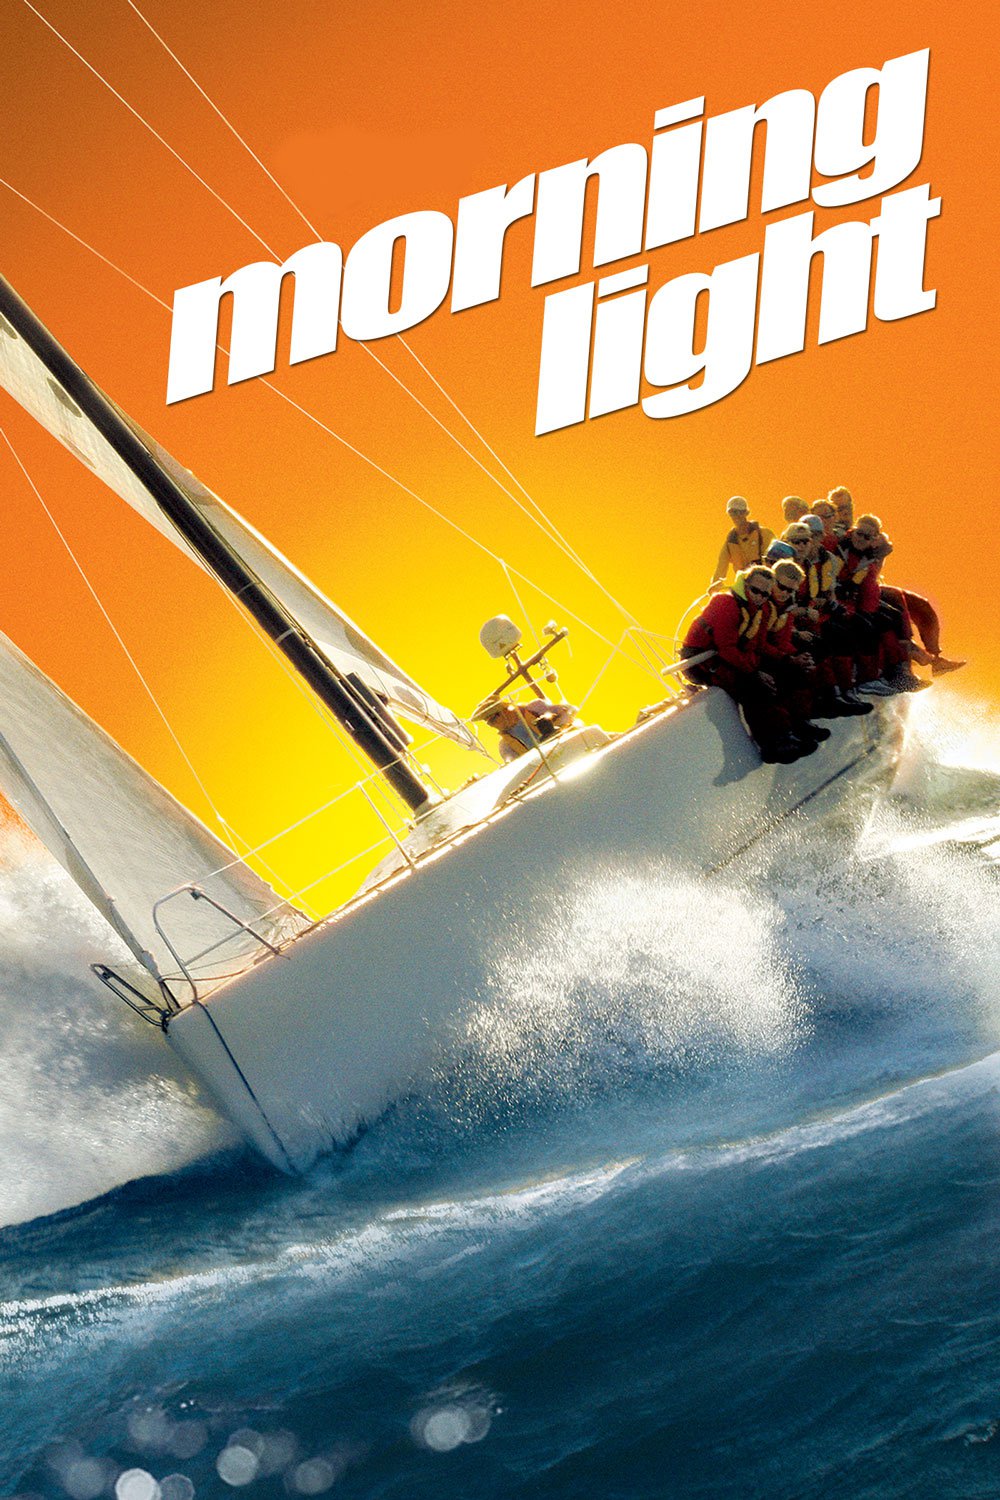 Poster for the movie "Morning Light"